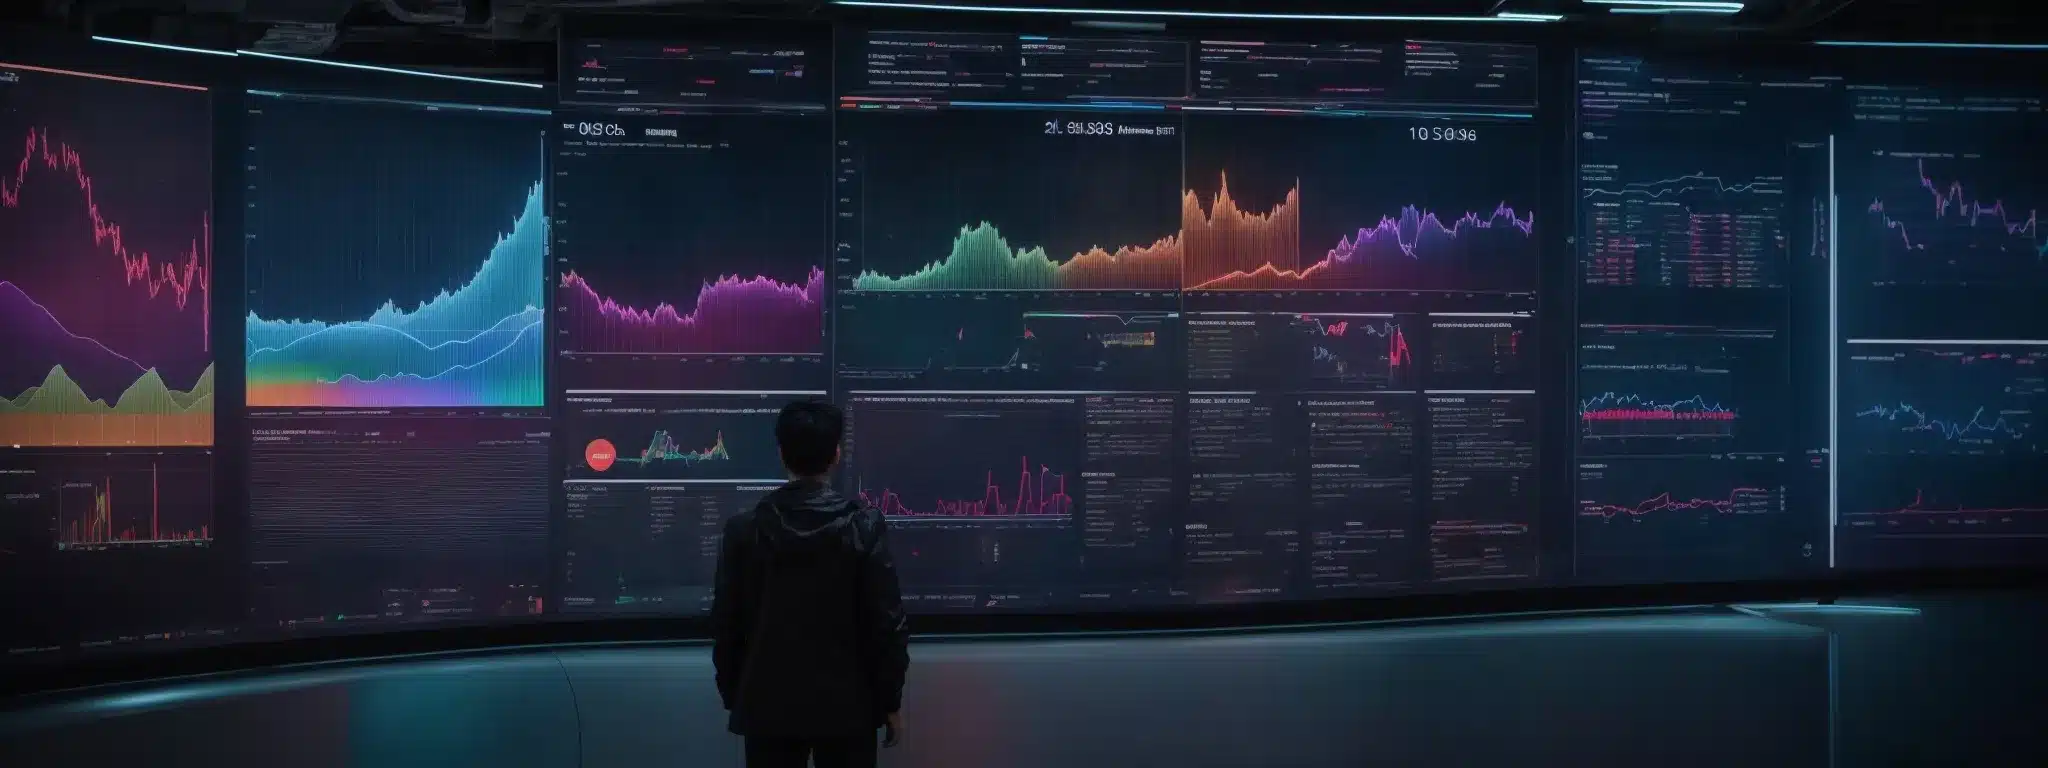 A Person Stands Before A Large, Futuristic Touchscreen Displaying Colorful Graphs And Marketing Analytics.